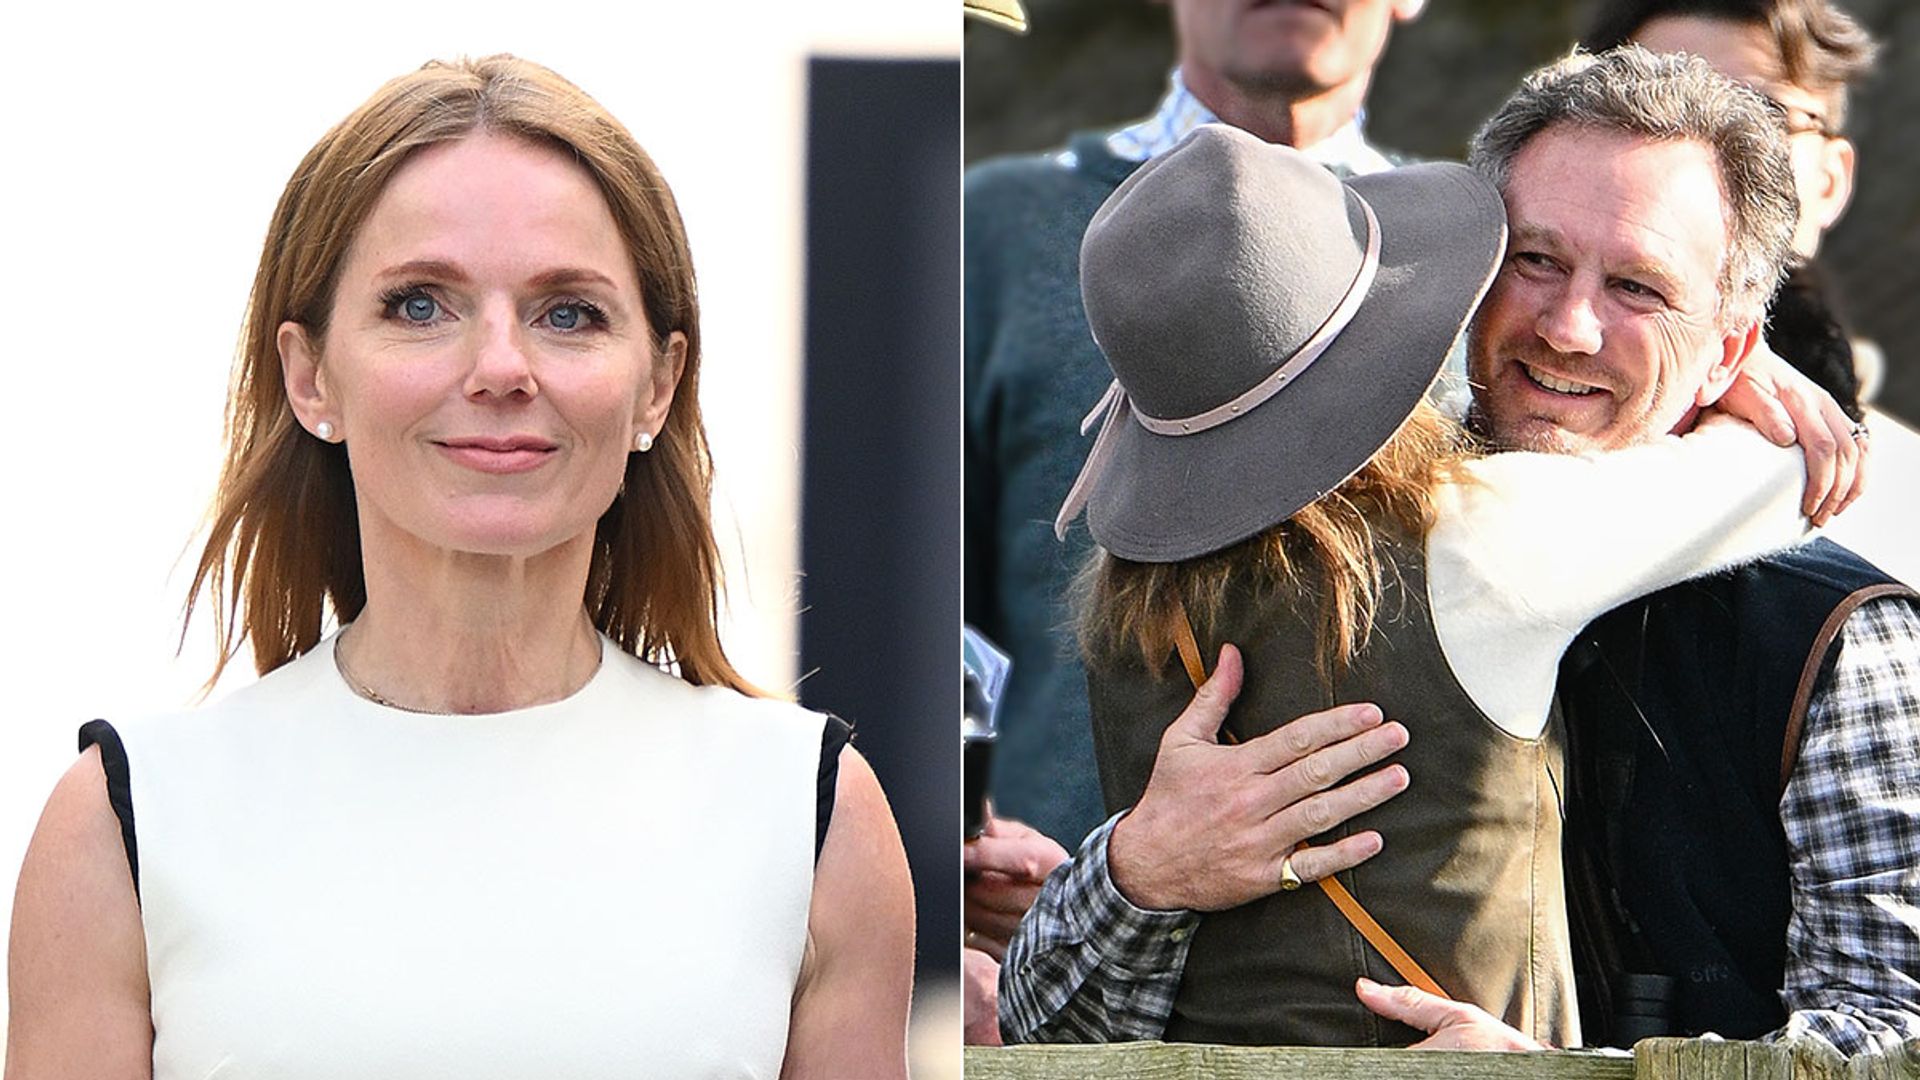 Geri Halliwell-Horner and husband Christian hug and hold hands during fun day out with son Monty